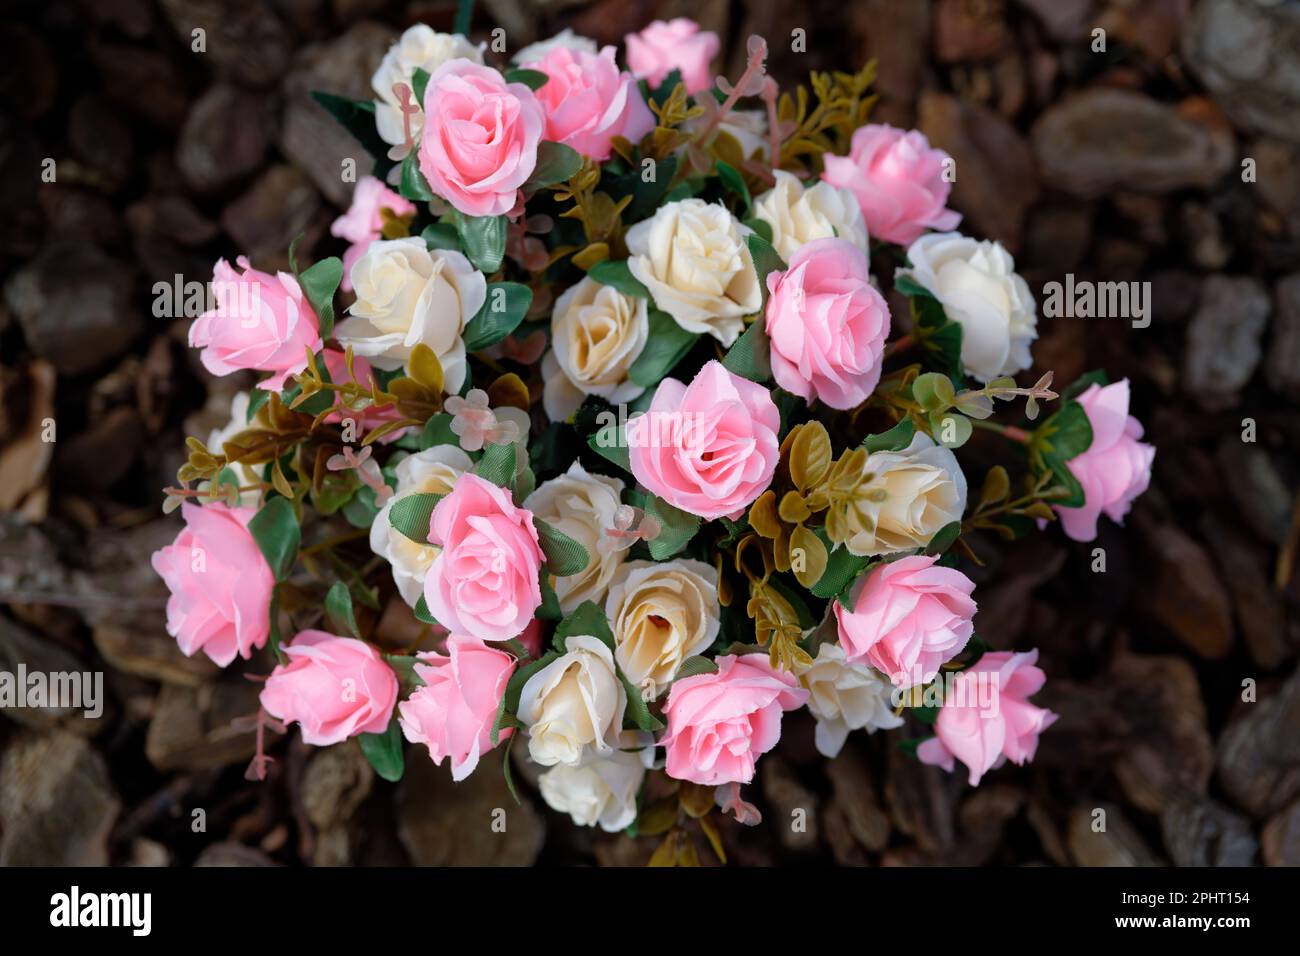 bouquet of artificial pink and beige roses seen from above against dark blurry ground Stock Photo